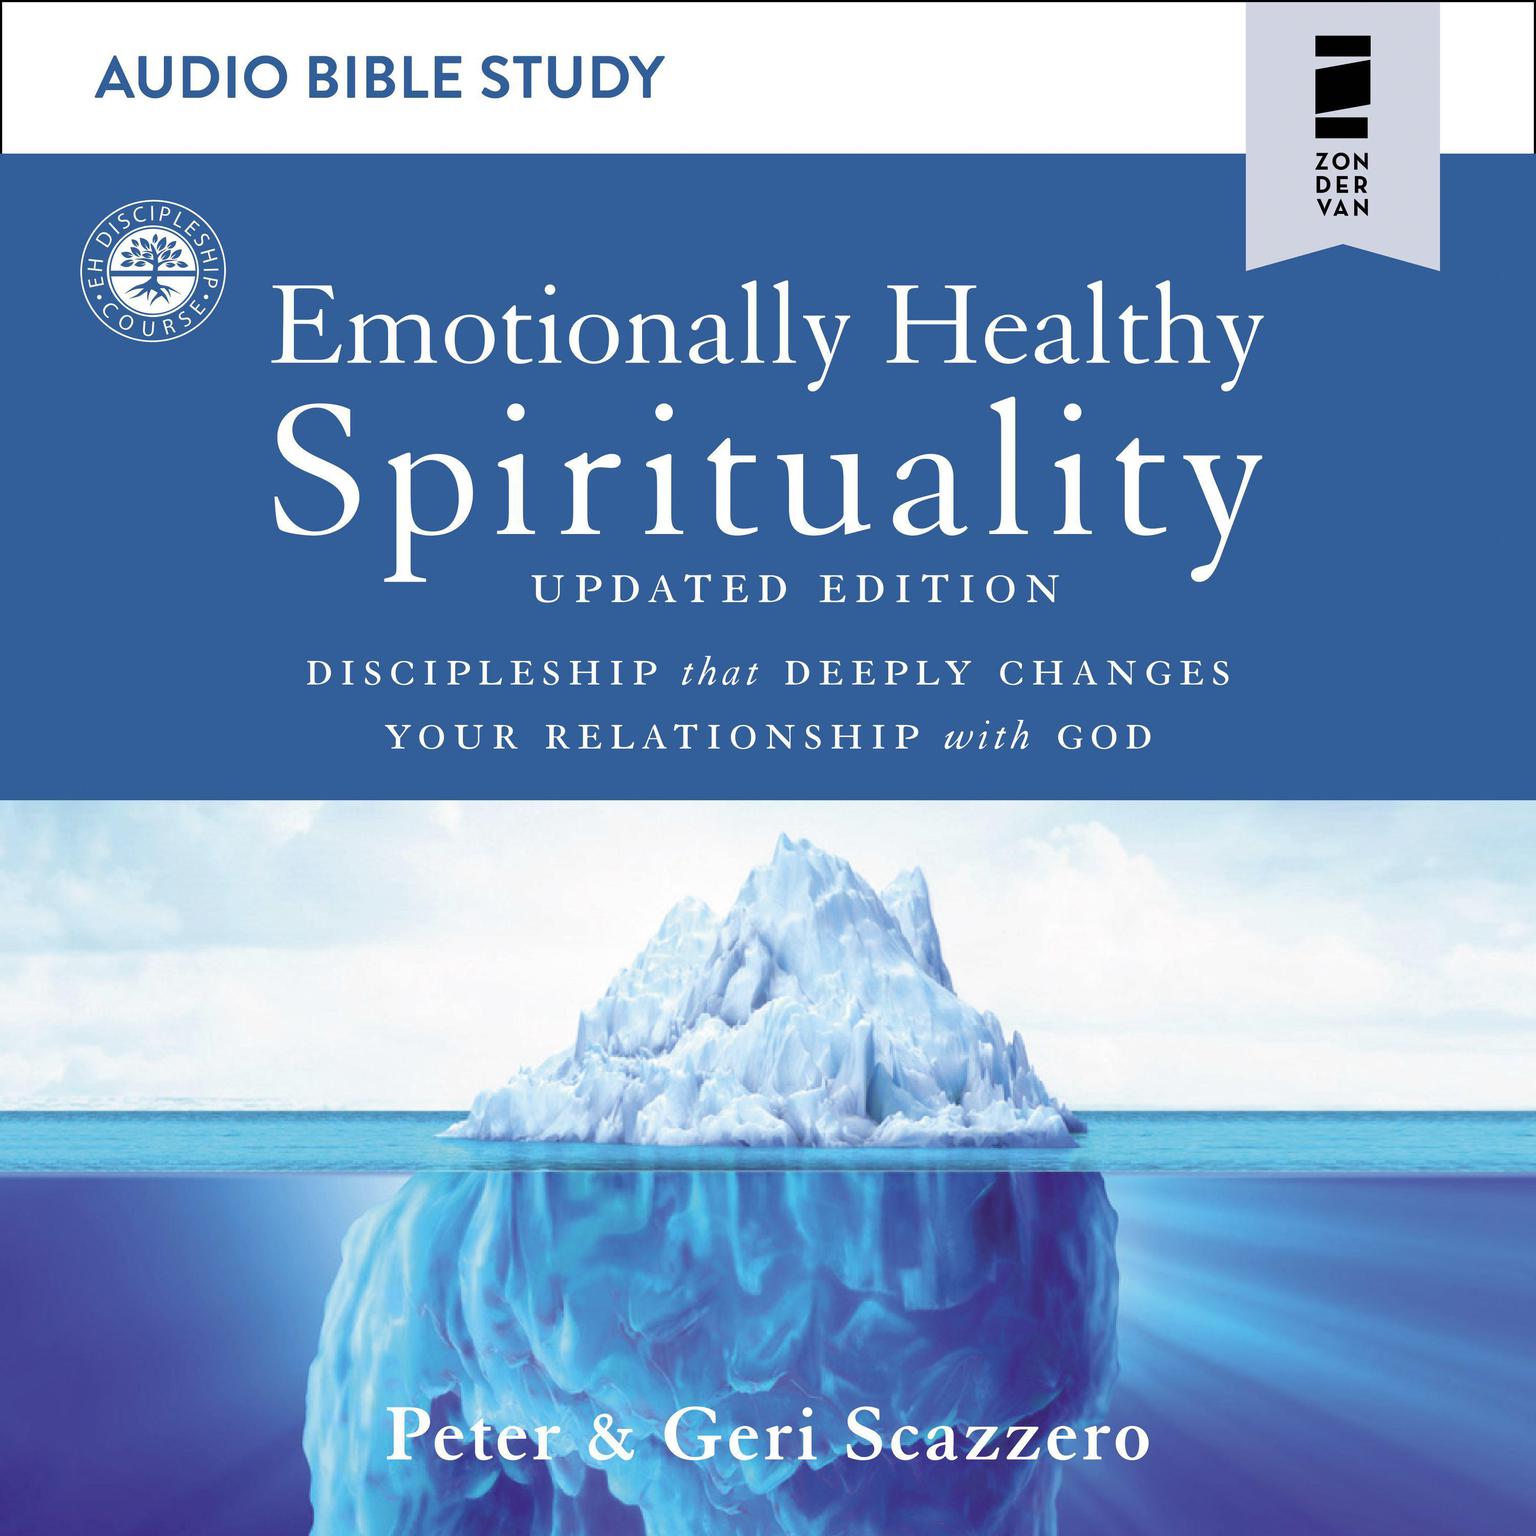 Emotionally Healthy Spirituality: Audio Bible Studies: Discipleship that Deeply Changes Your Relationship with God Audiobook, by Geri Scazzero